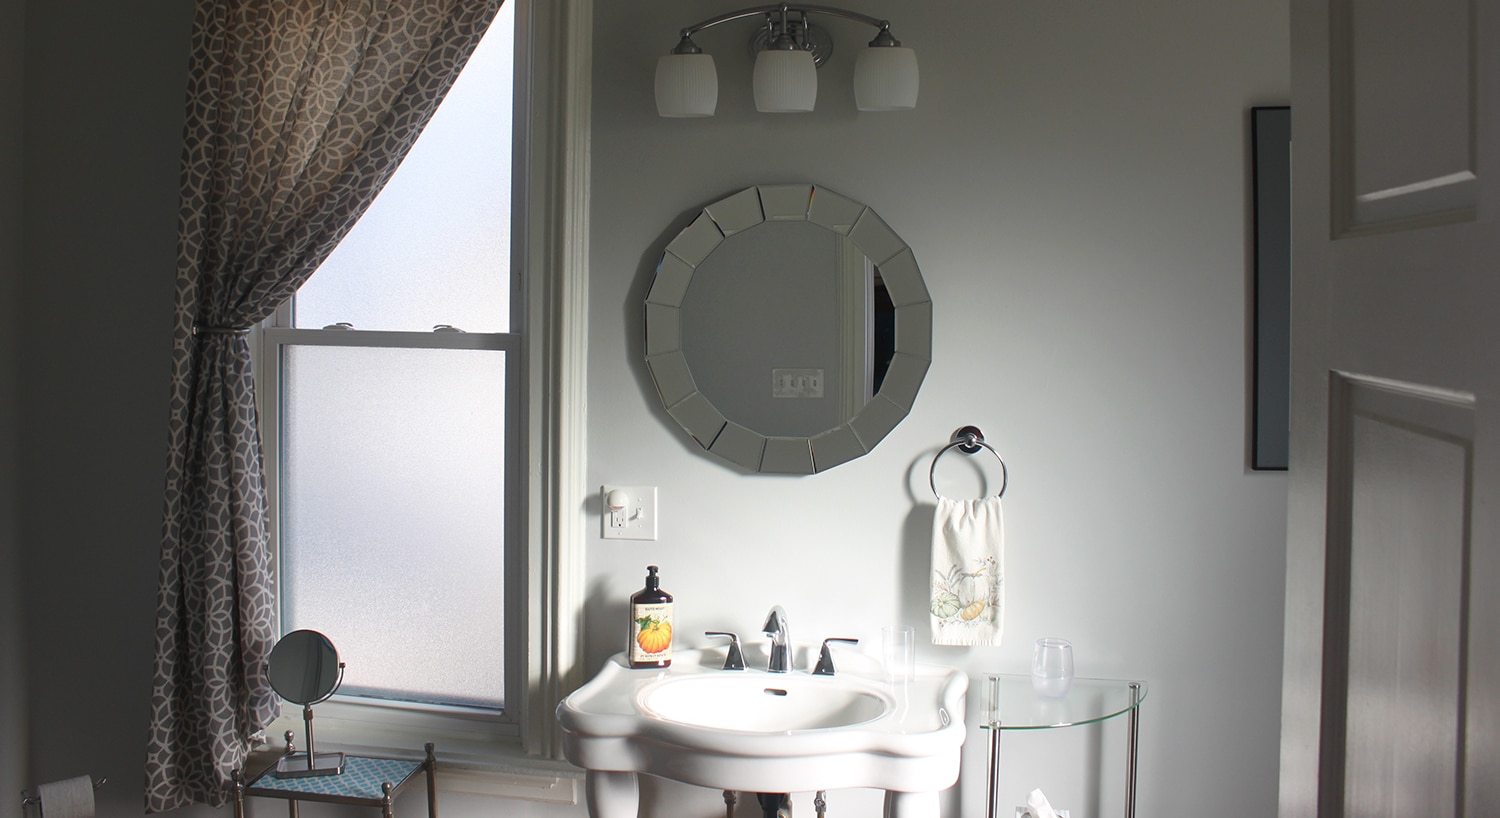 Large window, round mirror, and antique sink in the large bathroom in Julia's Room.